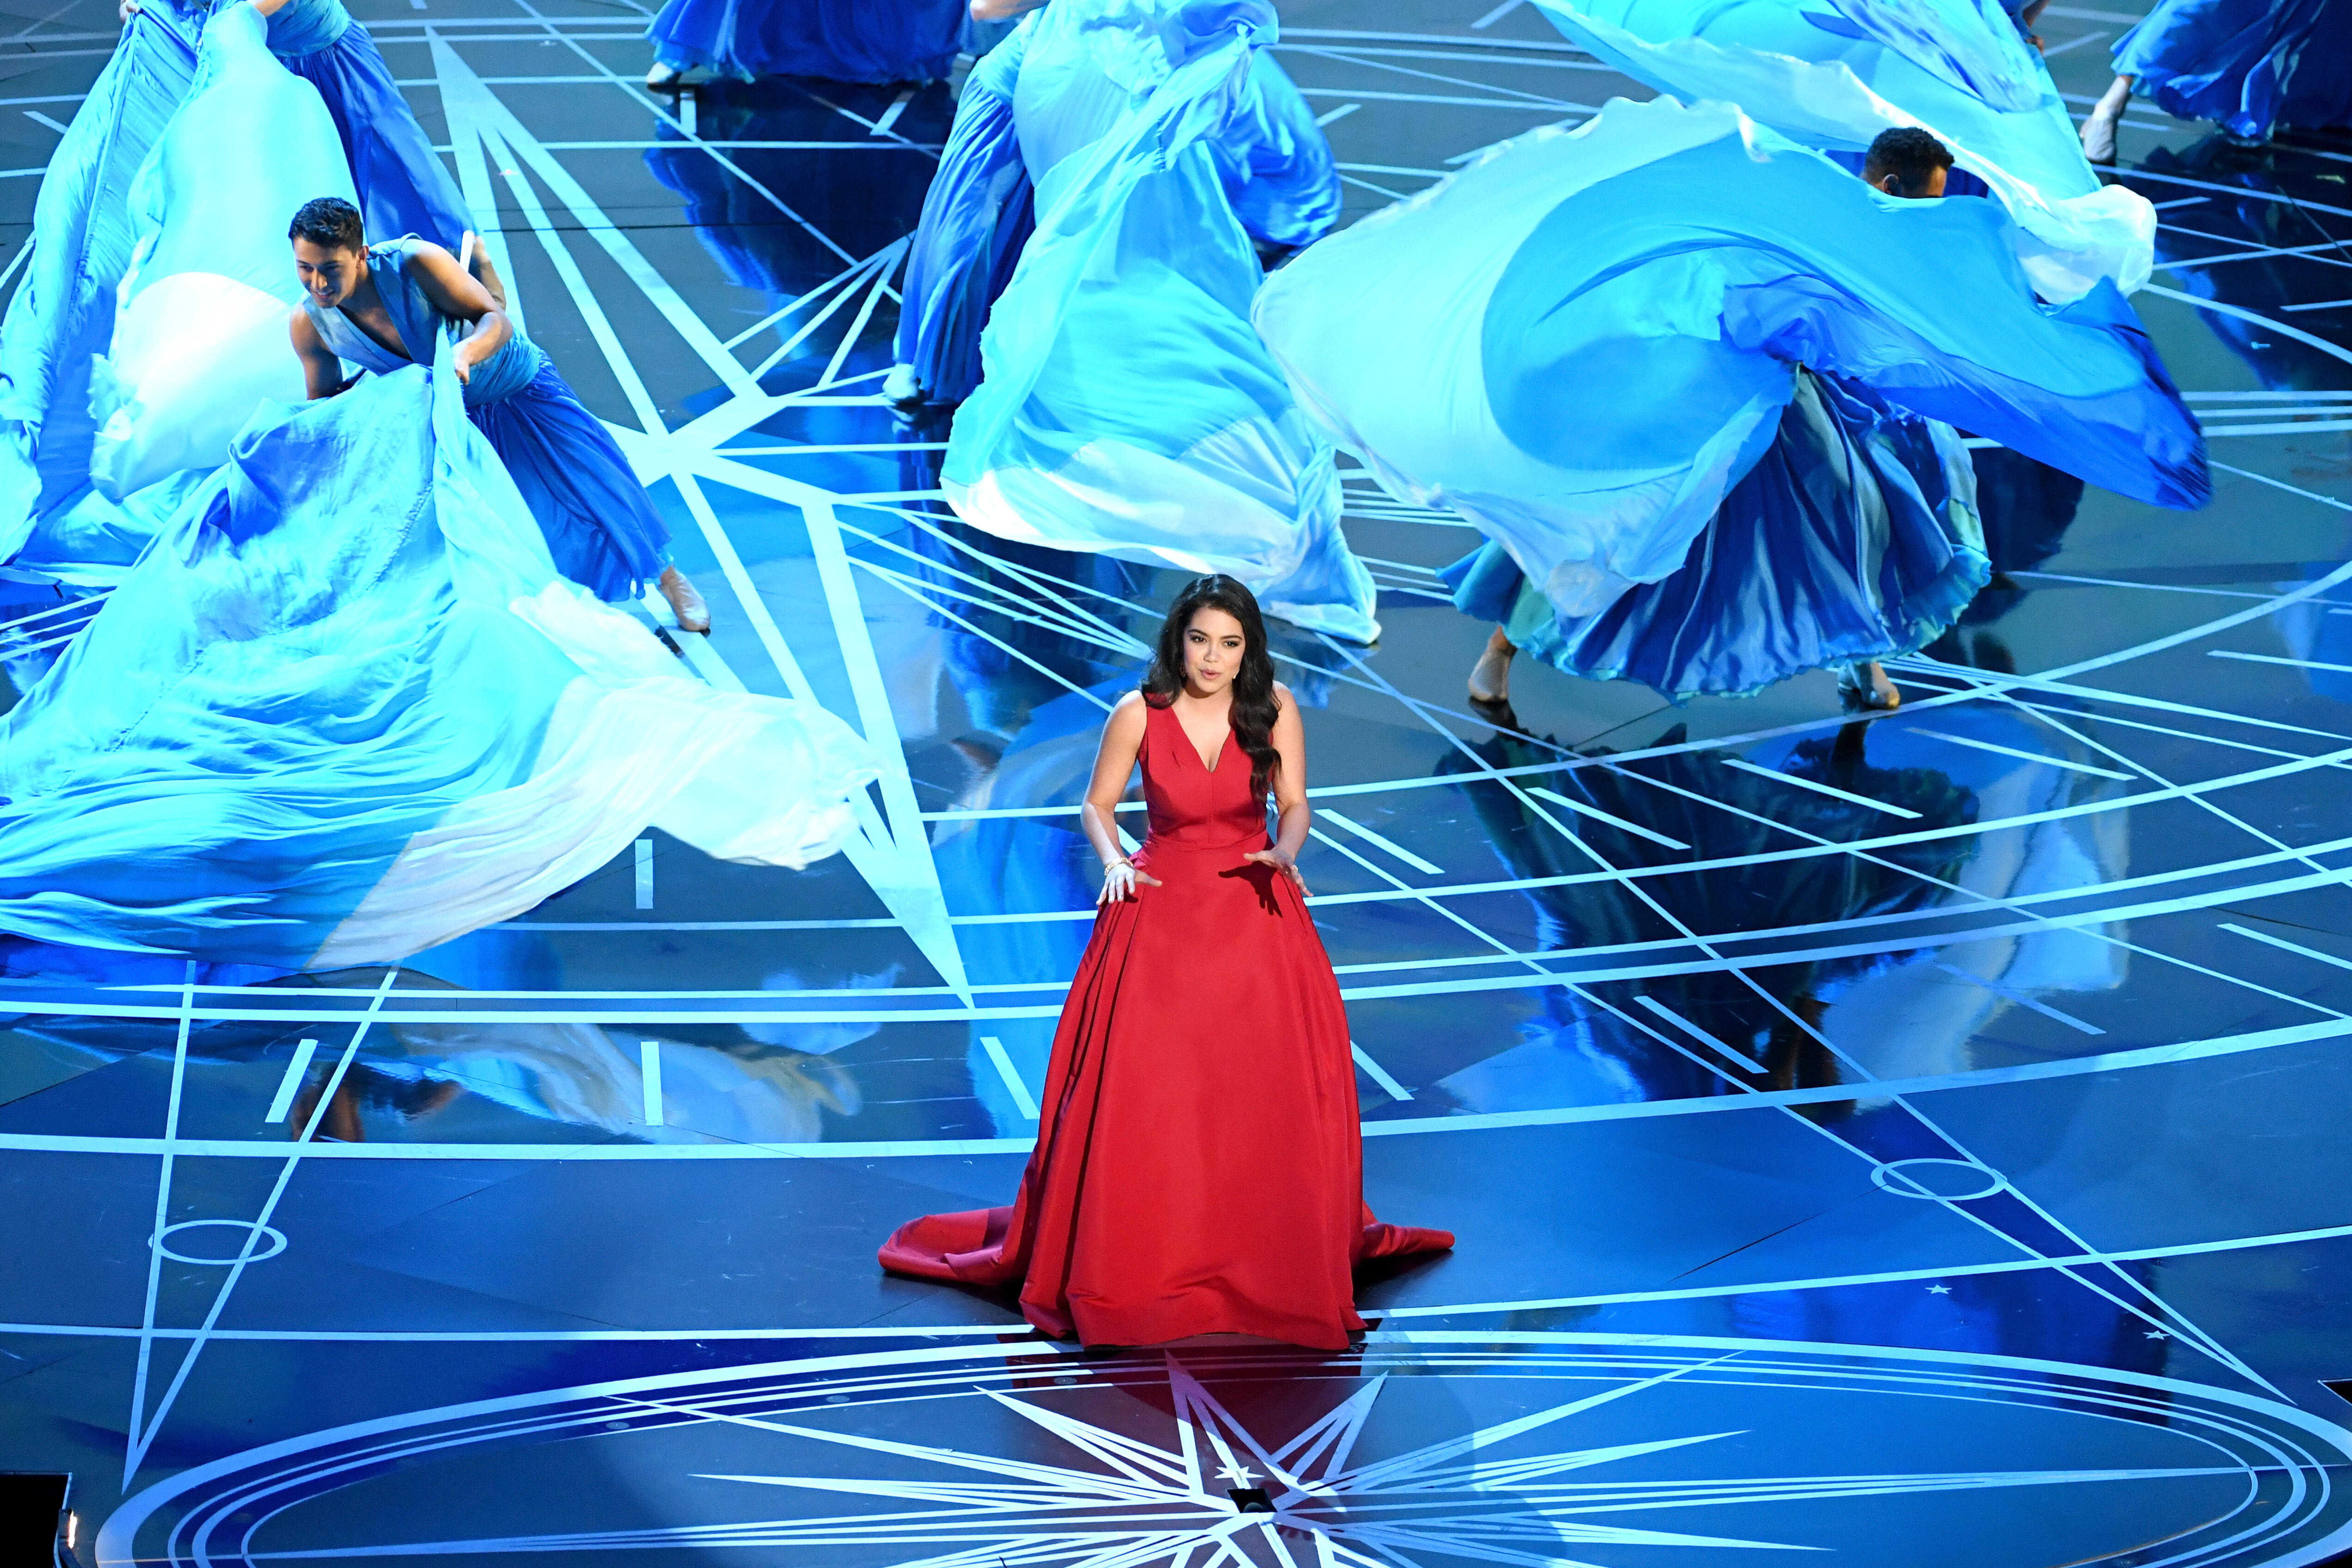 HOLLYWOOD, CA - FEBRUARY 26:  Actor/singer Auli'i Cravalho performs onstage during the 89th Annual Academy Awards at Hollywood & Highland Center on February 26, 2017 in Hollywood, California.  (Photo by Kevin Winter/Getty Images)